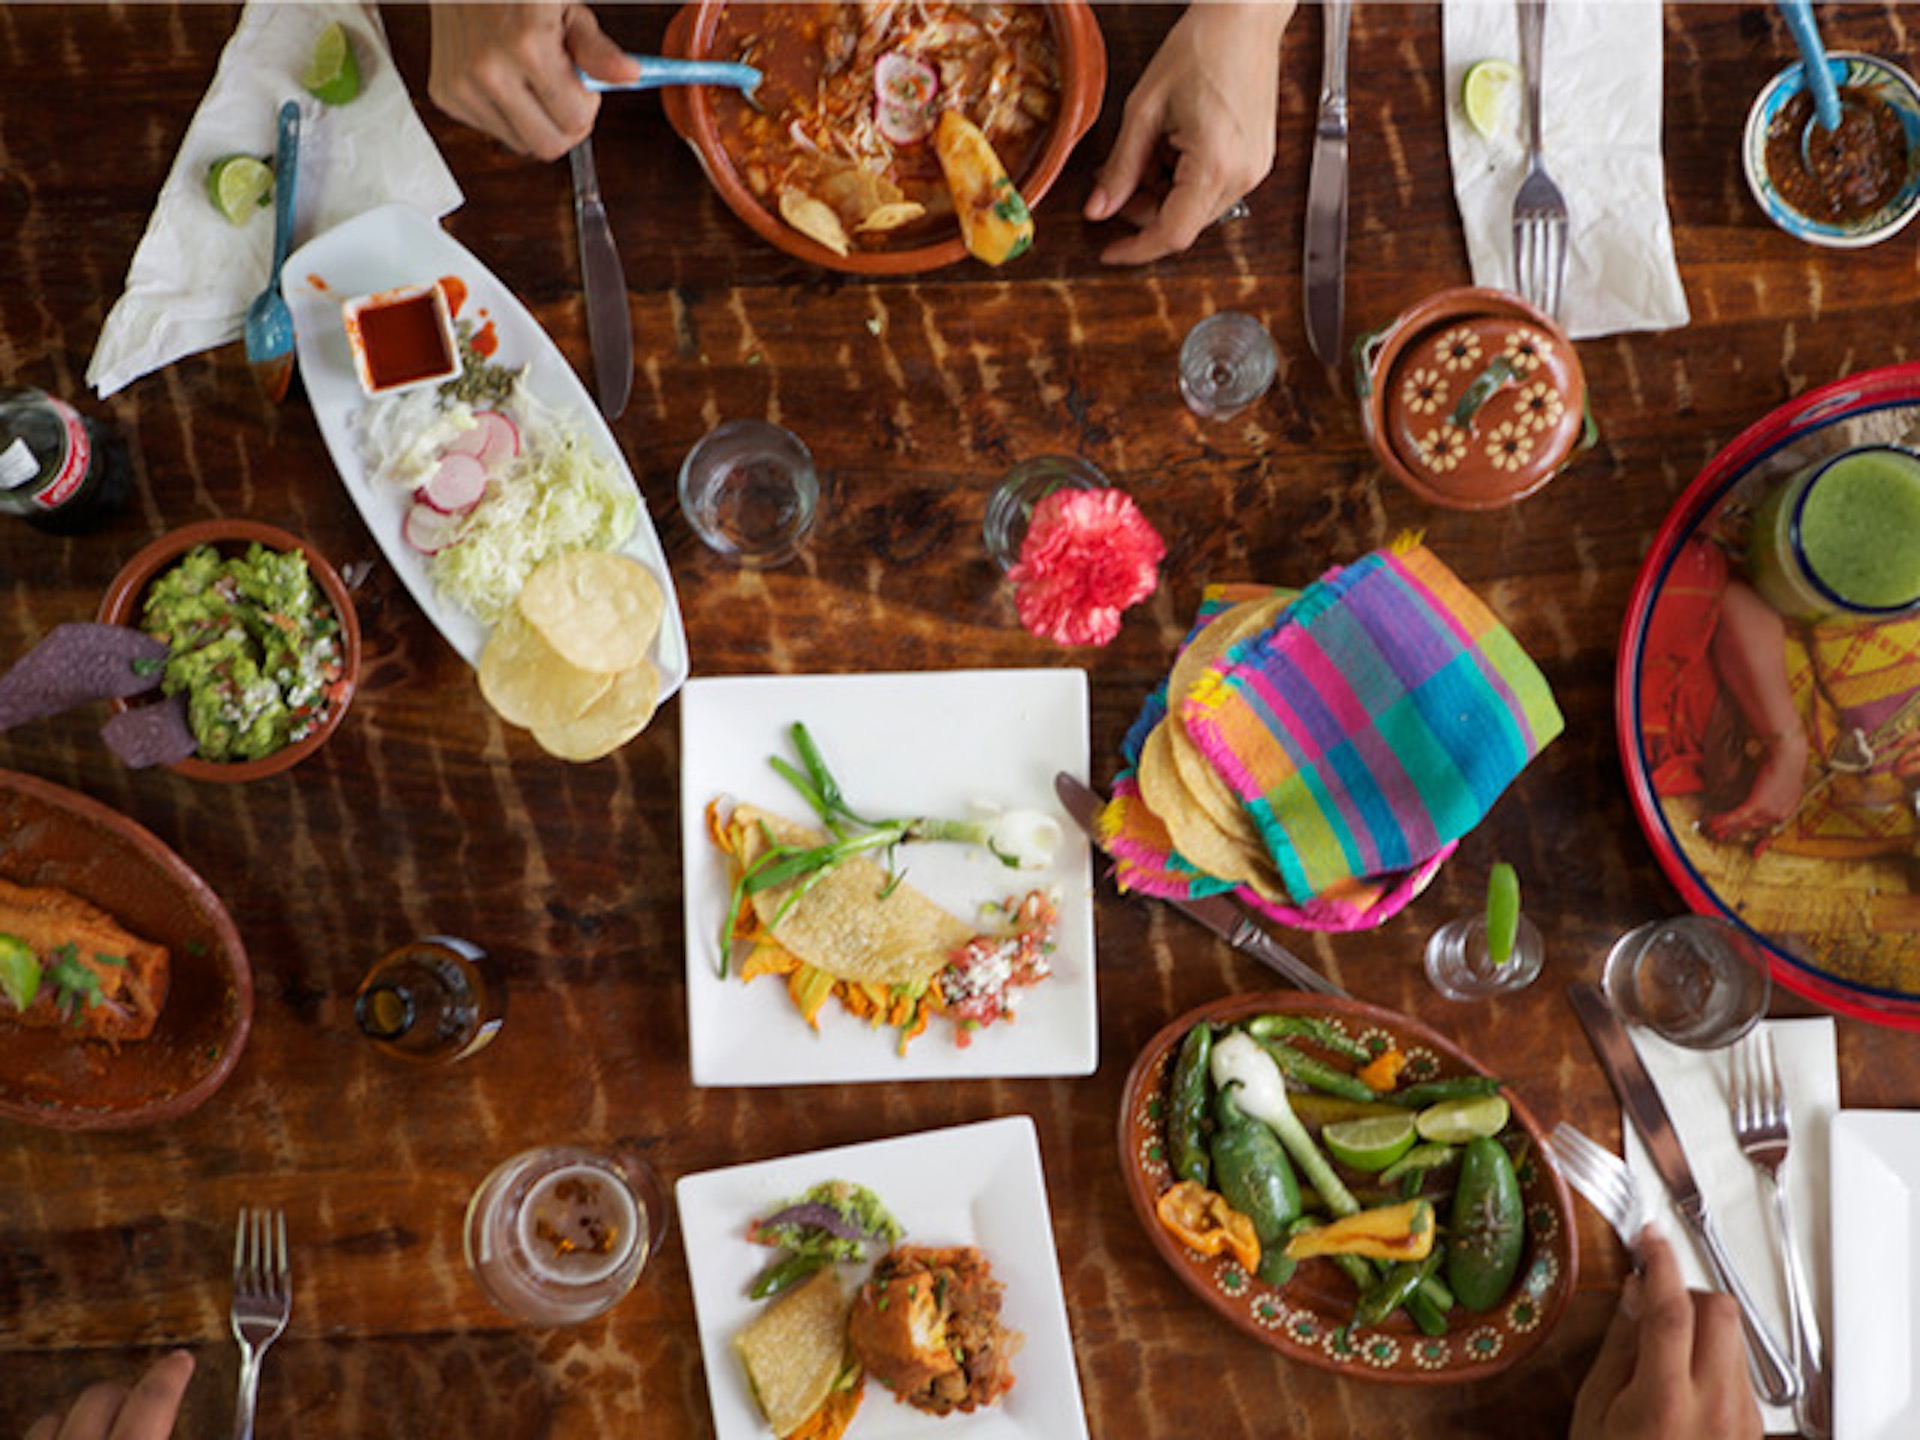 A spread at Oakland's Tamarindo Antojeria which is set to close at the end of the year.